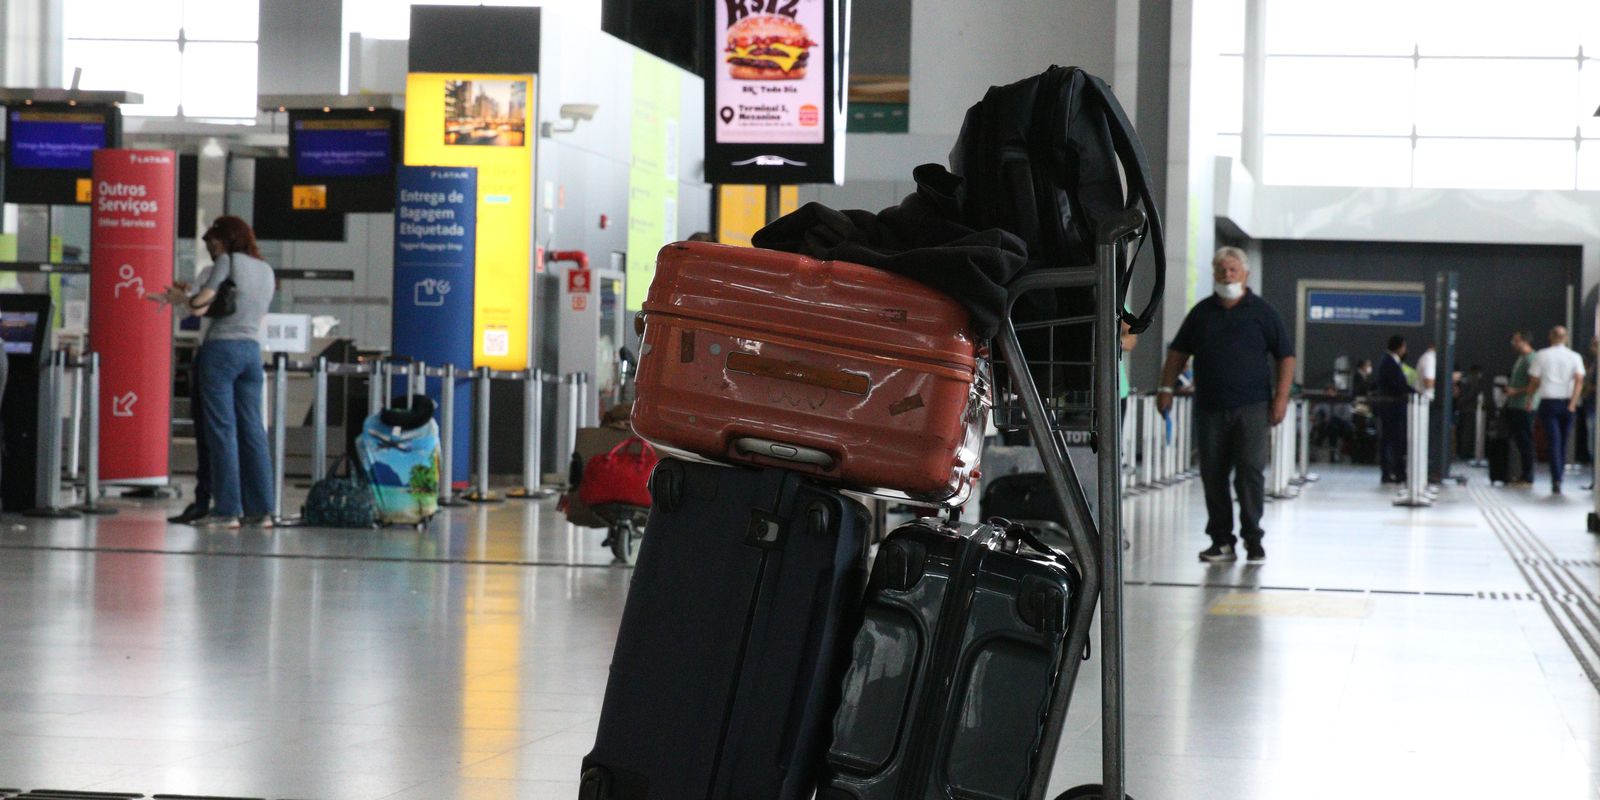 Chamber maintains free luggage;  text goes to presidential sanction